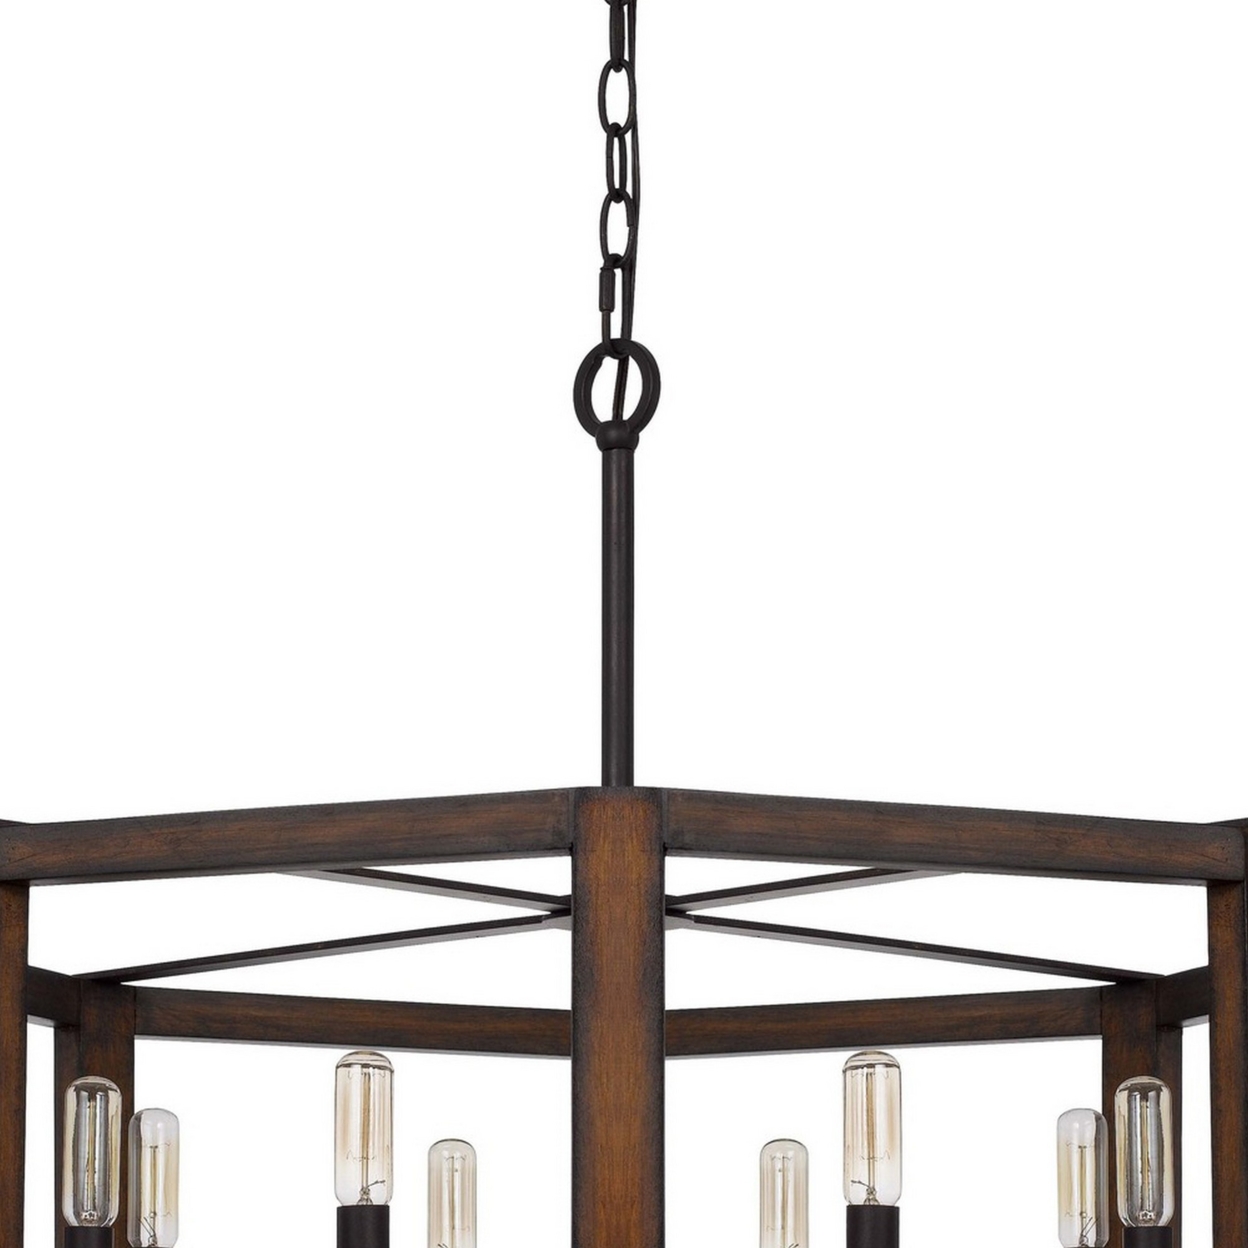 Chandelier With Hexagonal Shape Open Wooden Frame And Hanging Chain, Brown- Saltoro Sherpi